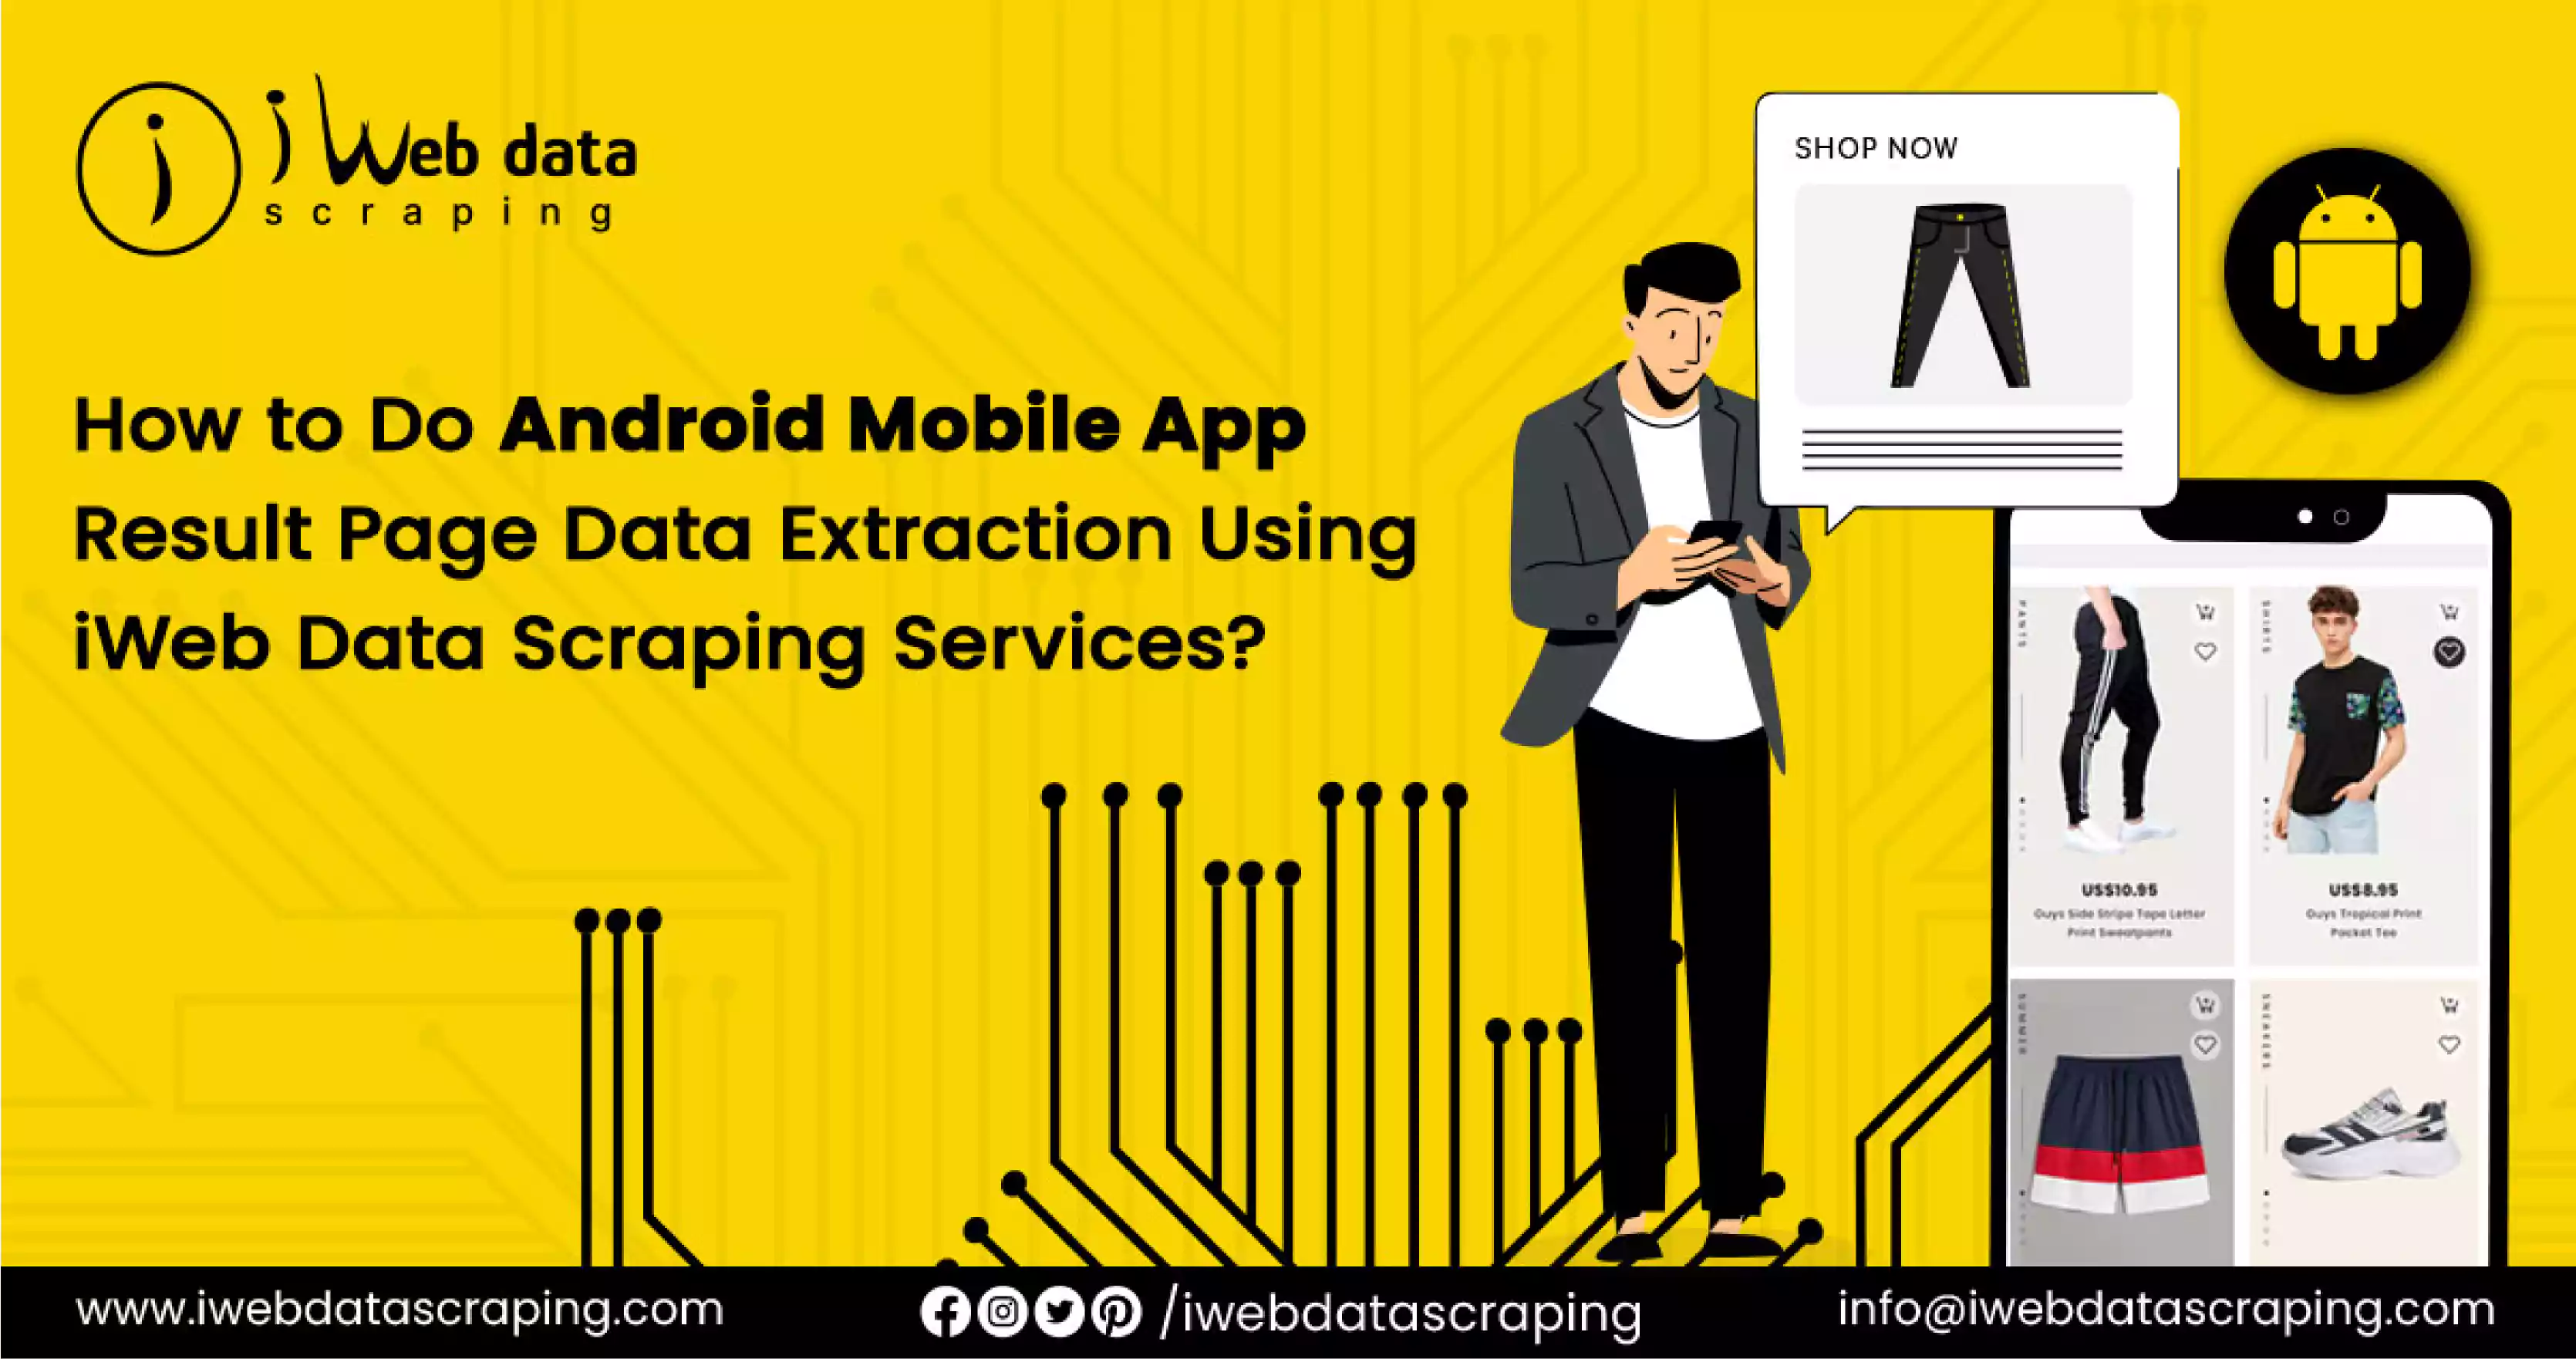 How-to-Do-Android-Mobile-App-Result-Page-Data-Extraction-Using-iWeb-Data-Scraping-Services.jpgg